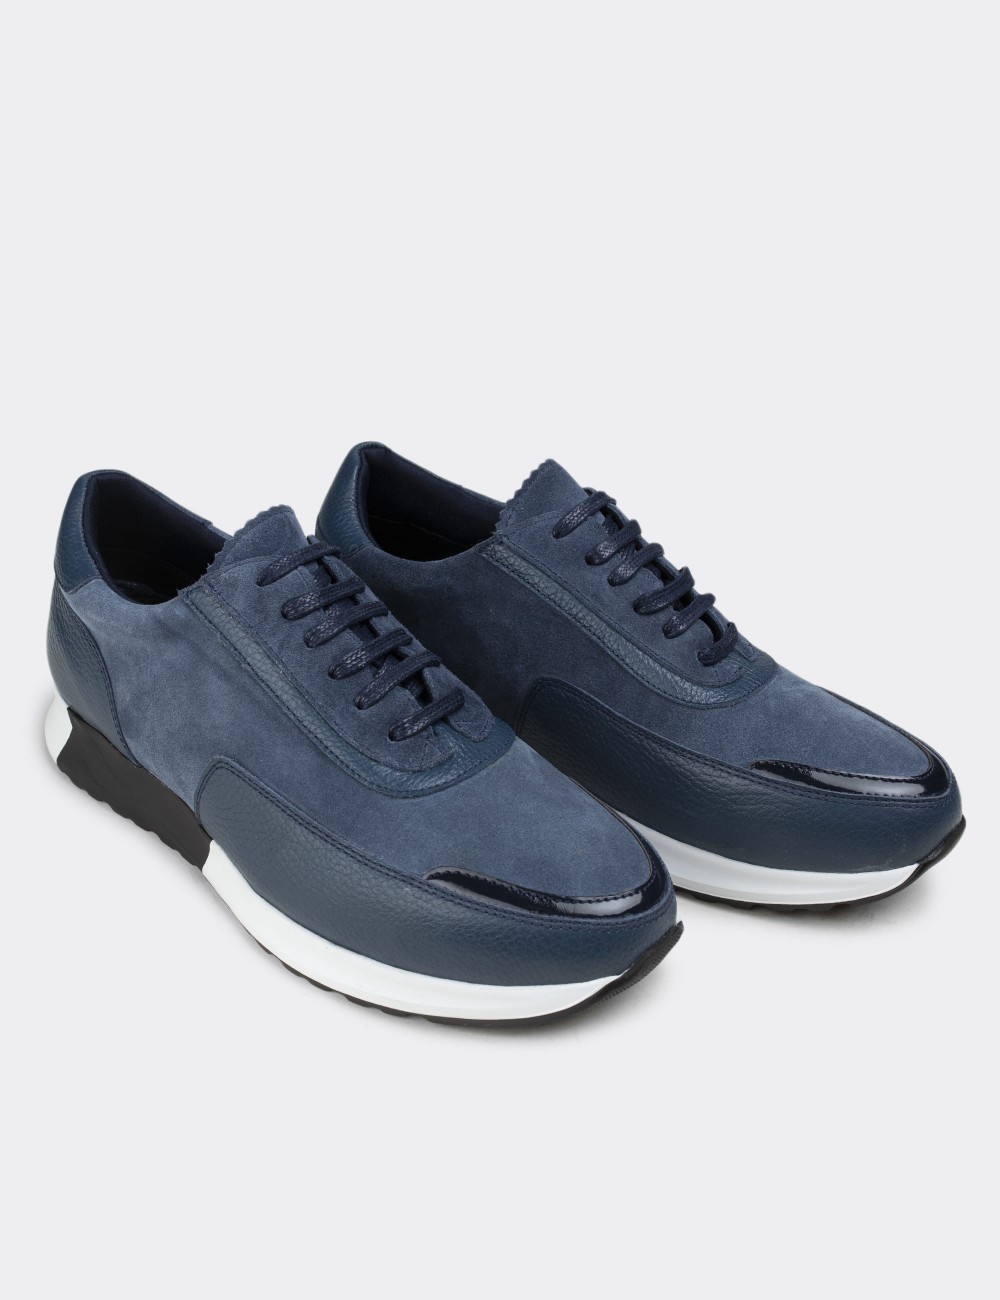 Blue Suede Leather Sneakers - 01819MMVIE02